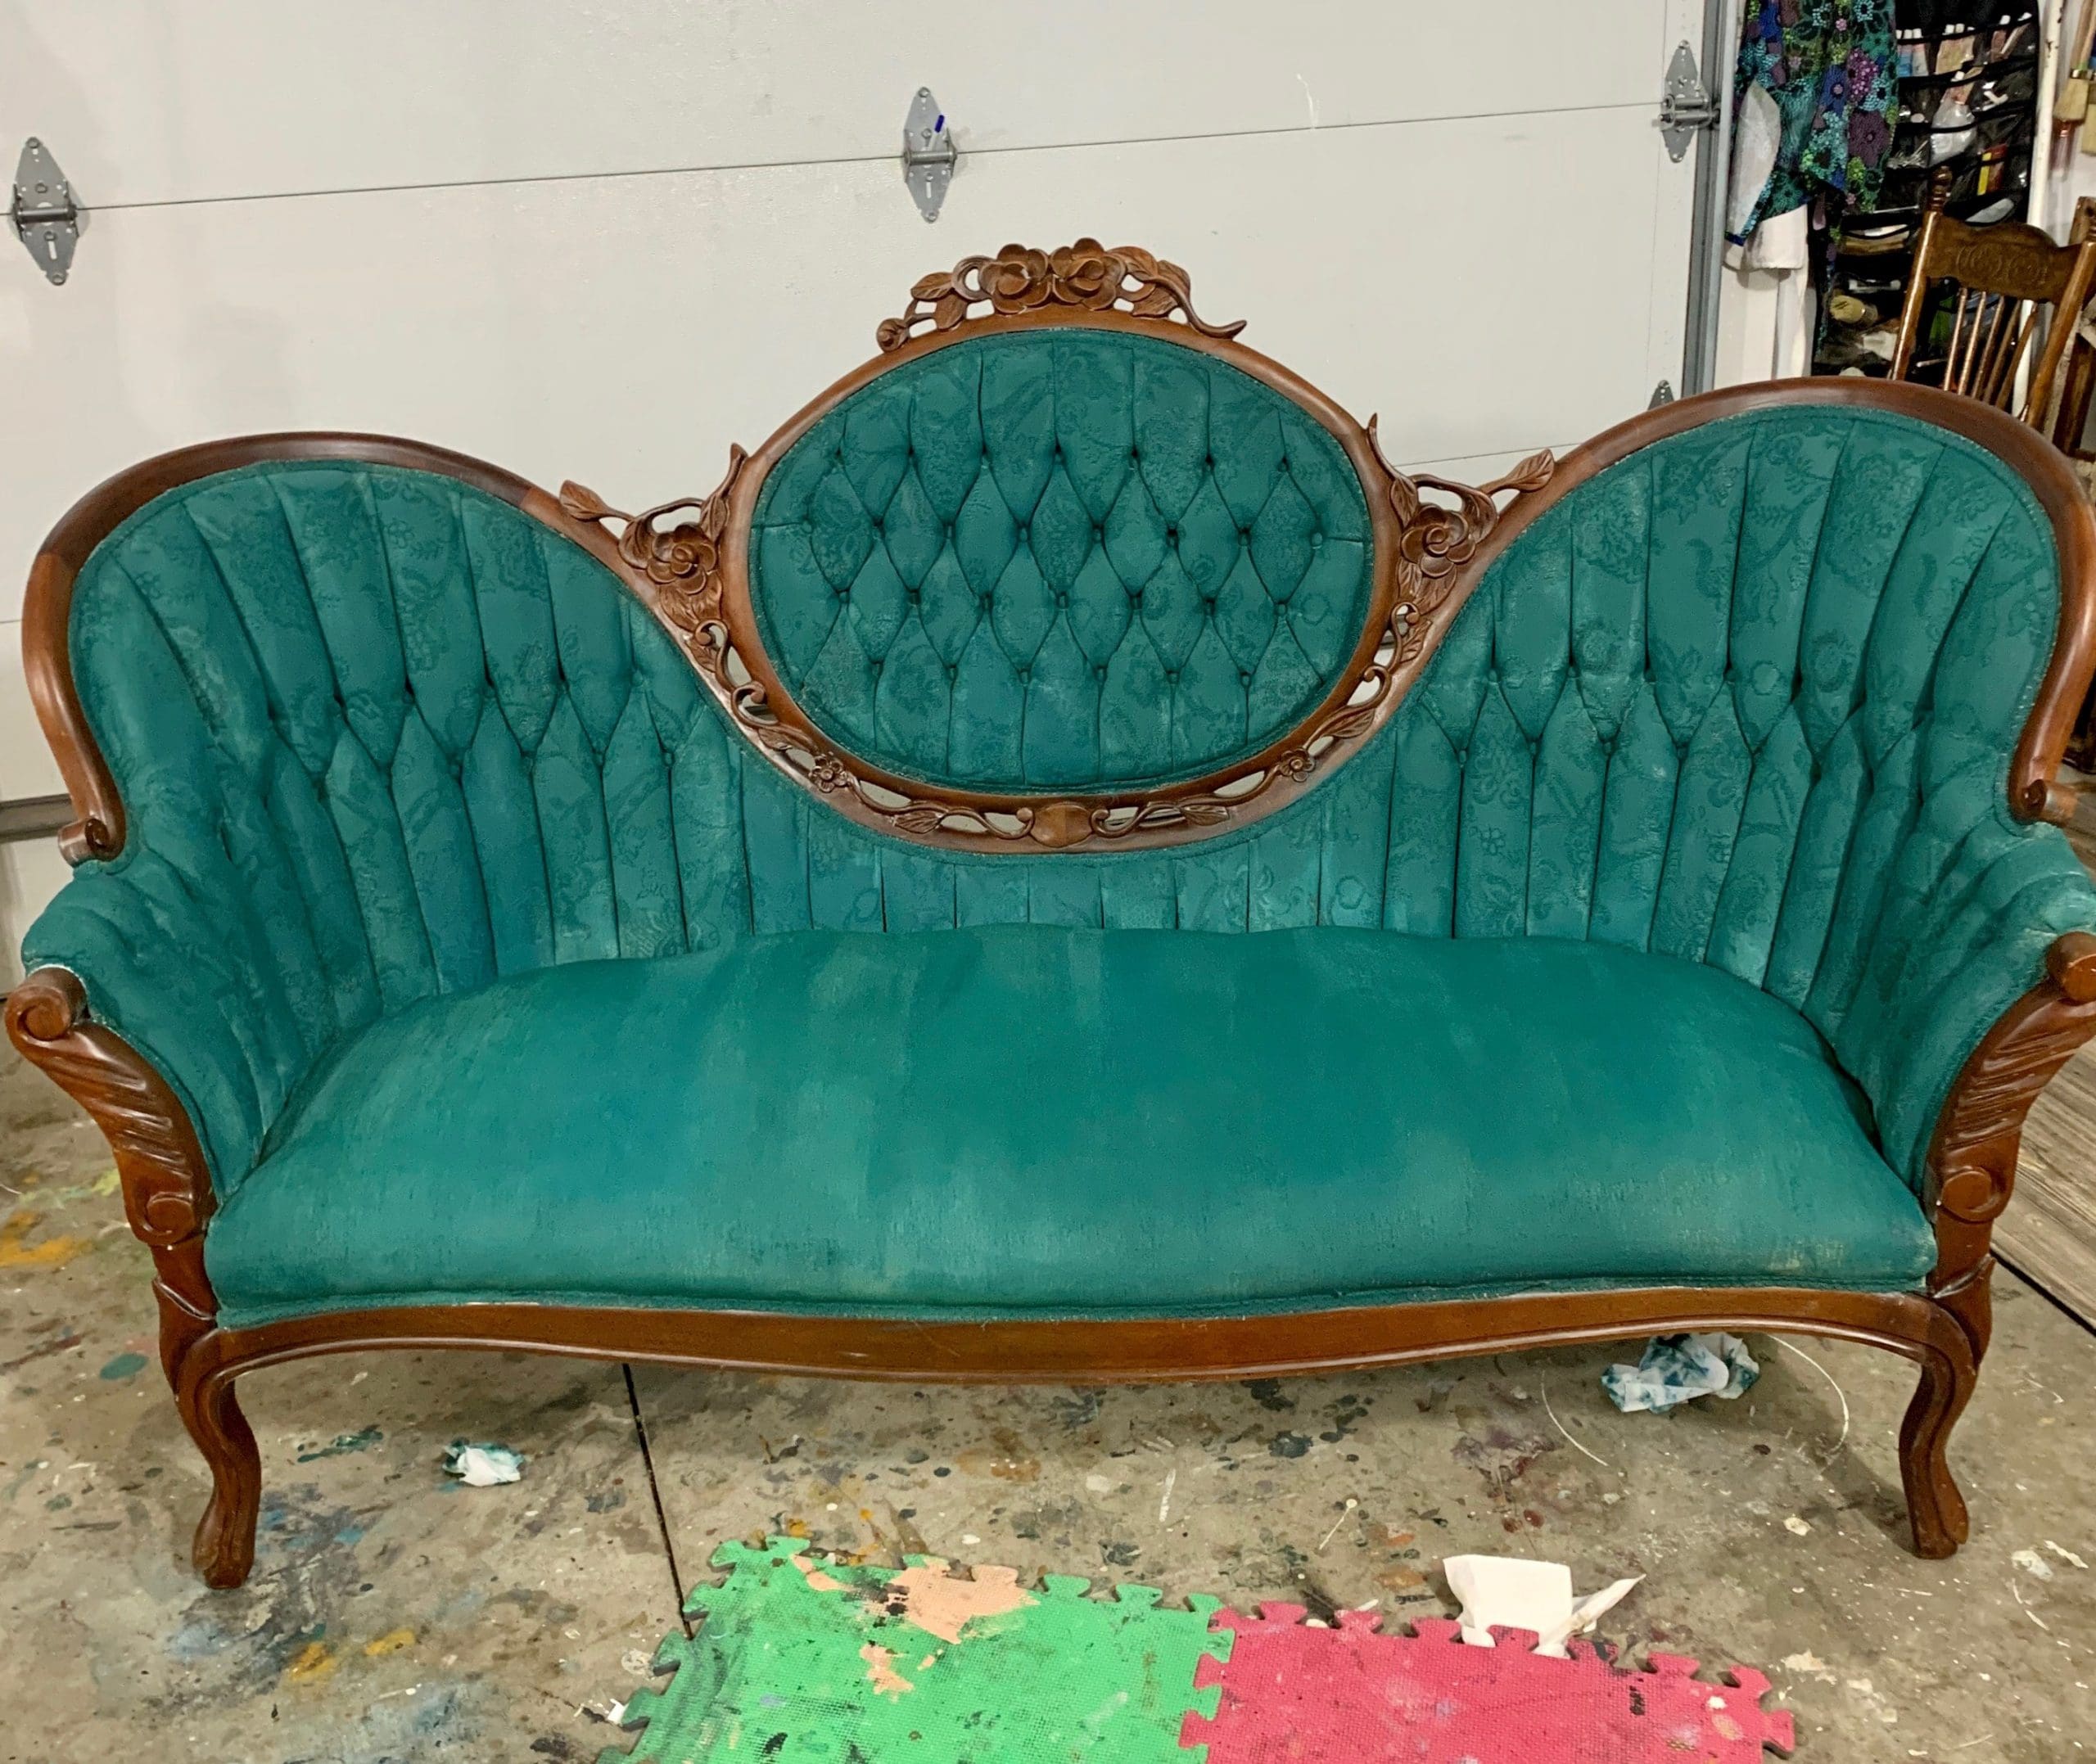 How to paint fabric. How to paint upholstery.